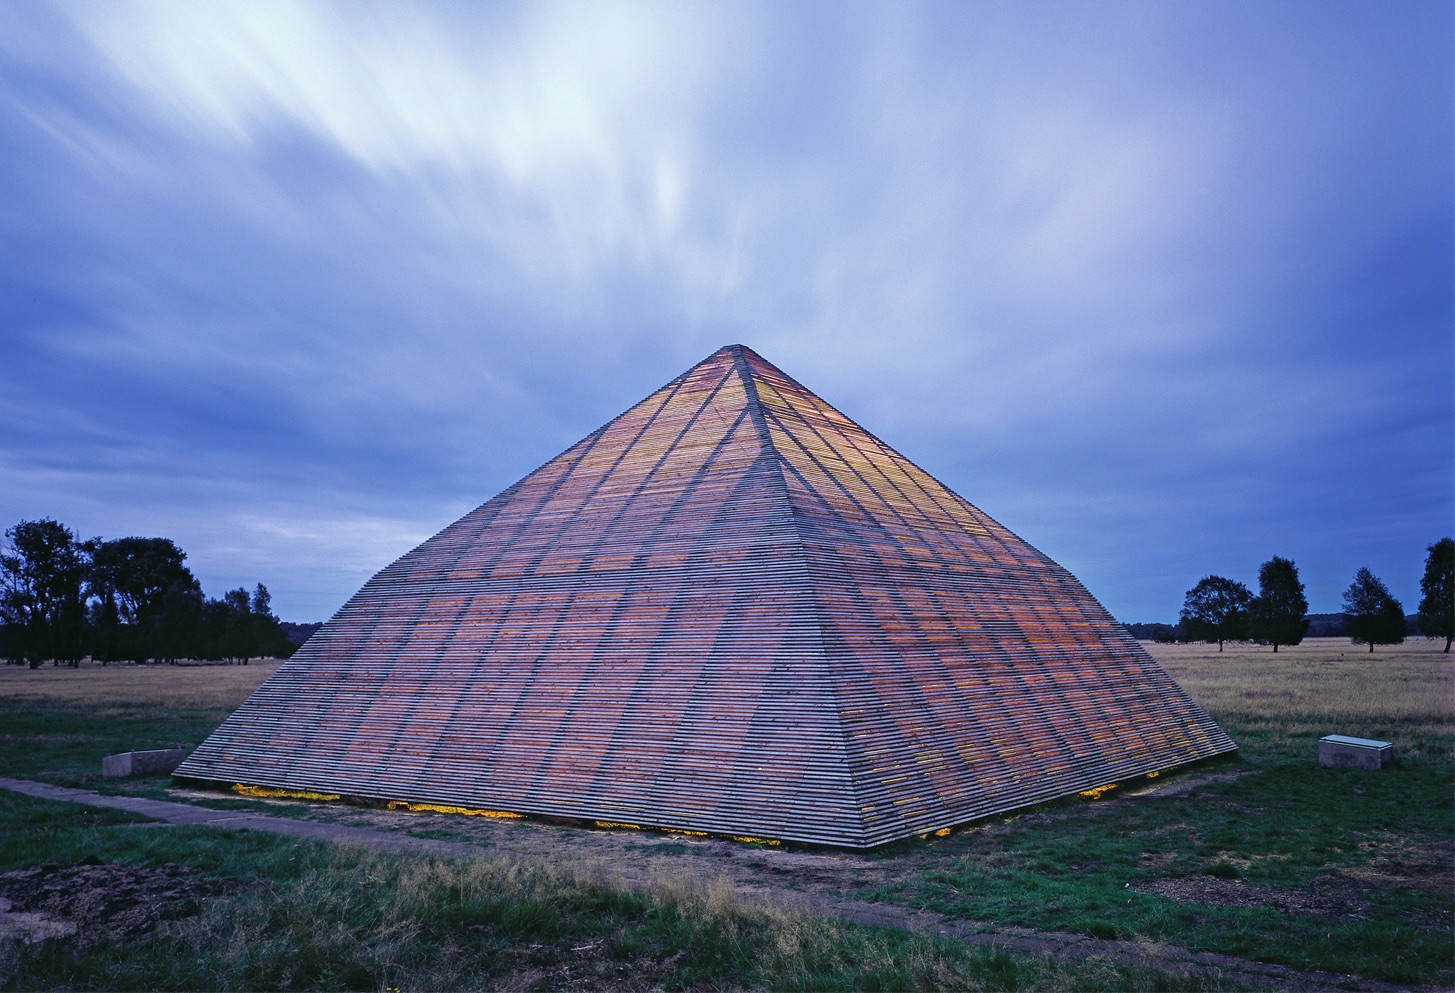 Implementation of the Folded Pyramid Art Installation